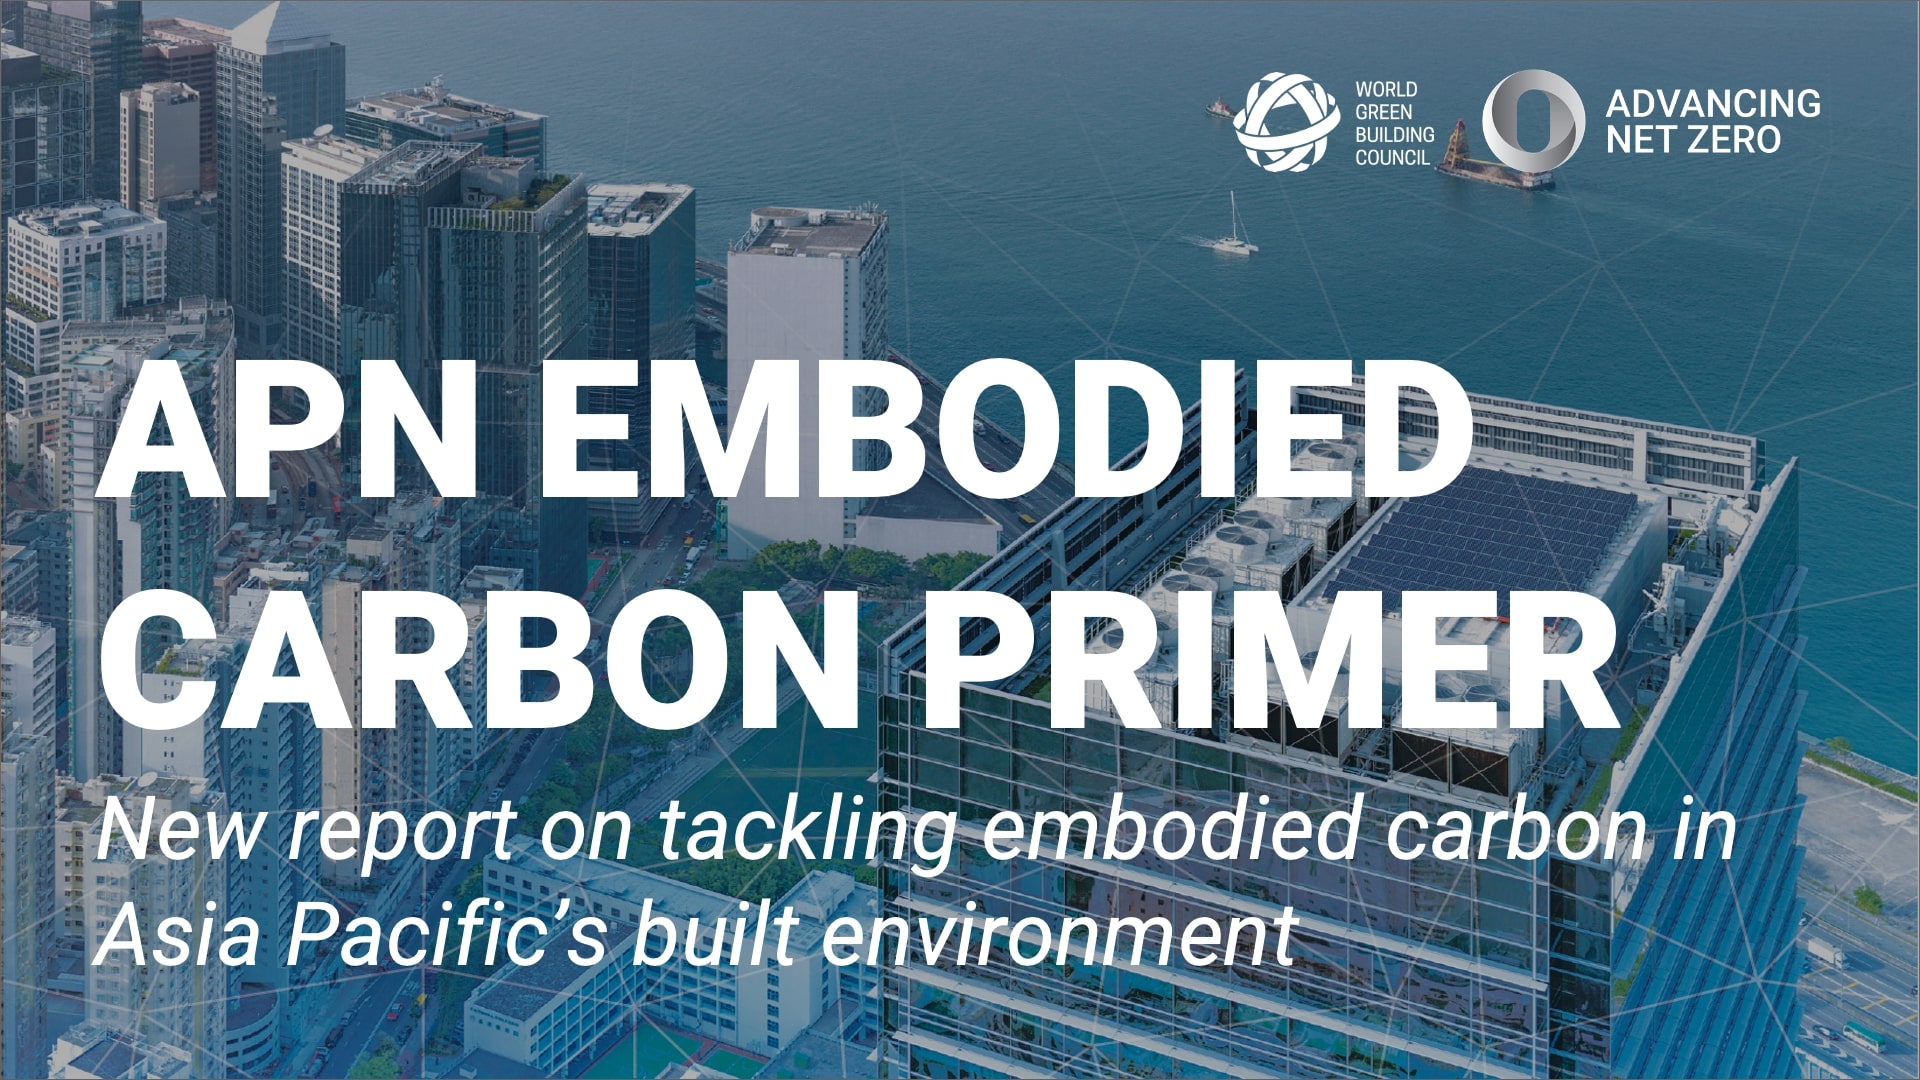 New WorldGBC report outlines how Asia Pacific can build back better by tackling embodied carbon in built environment